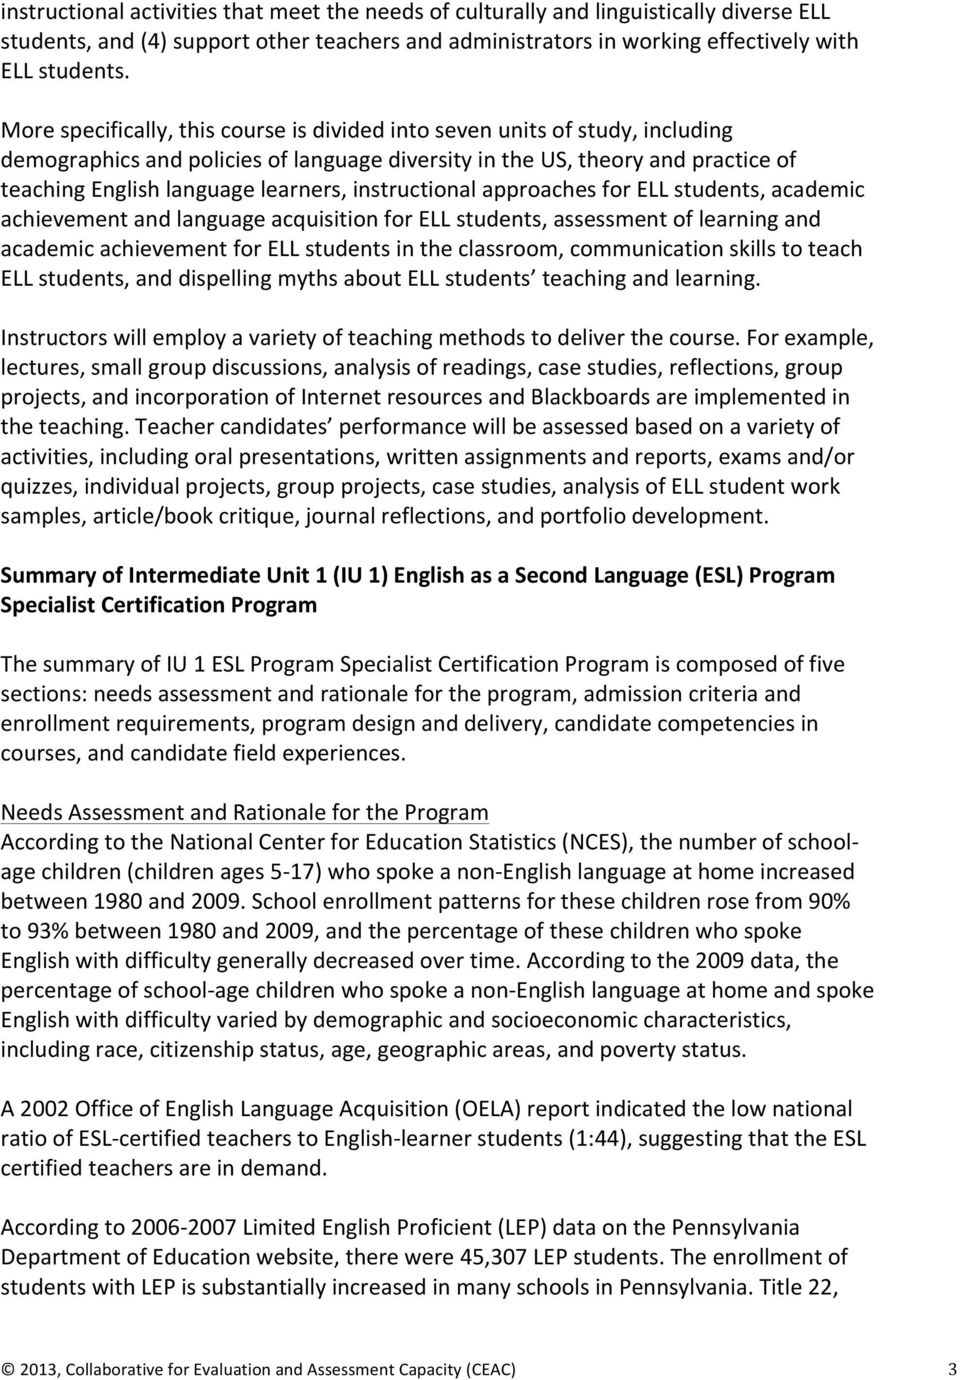 instructional approaches for ELL students, academic achievement and language acquisition for ELL students, assessment of learning and academic achievement for ELL students in the classroom,